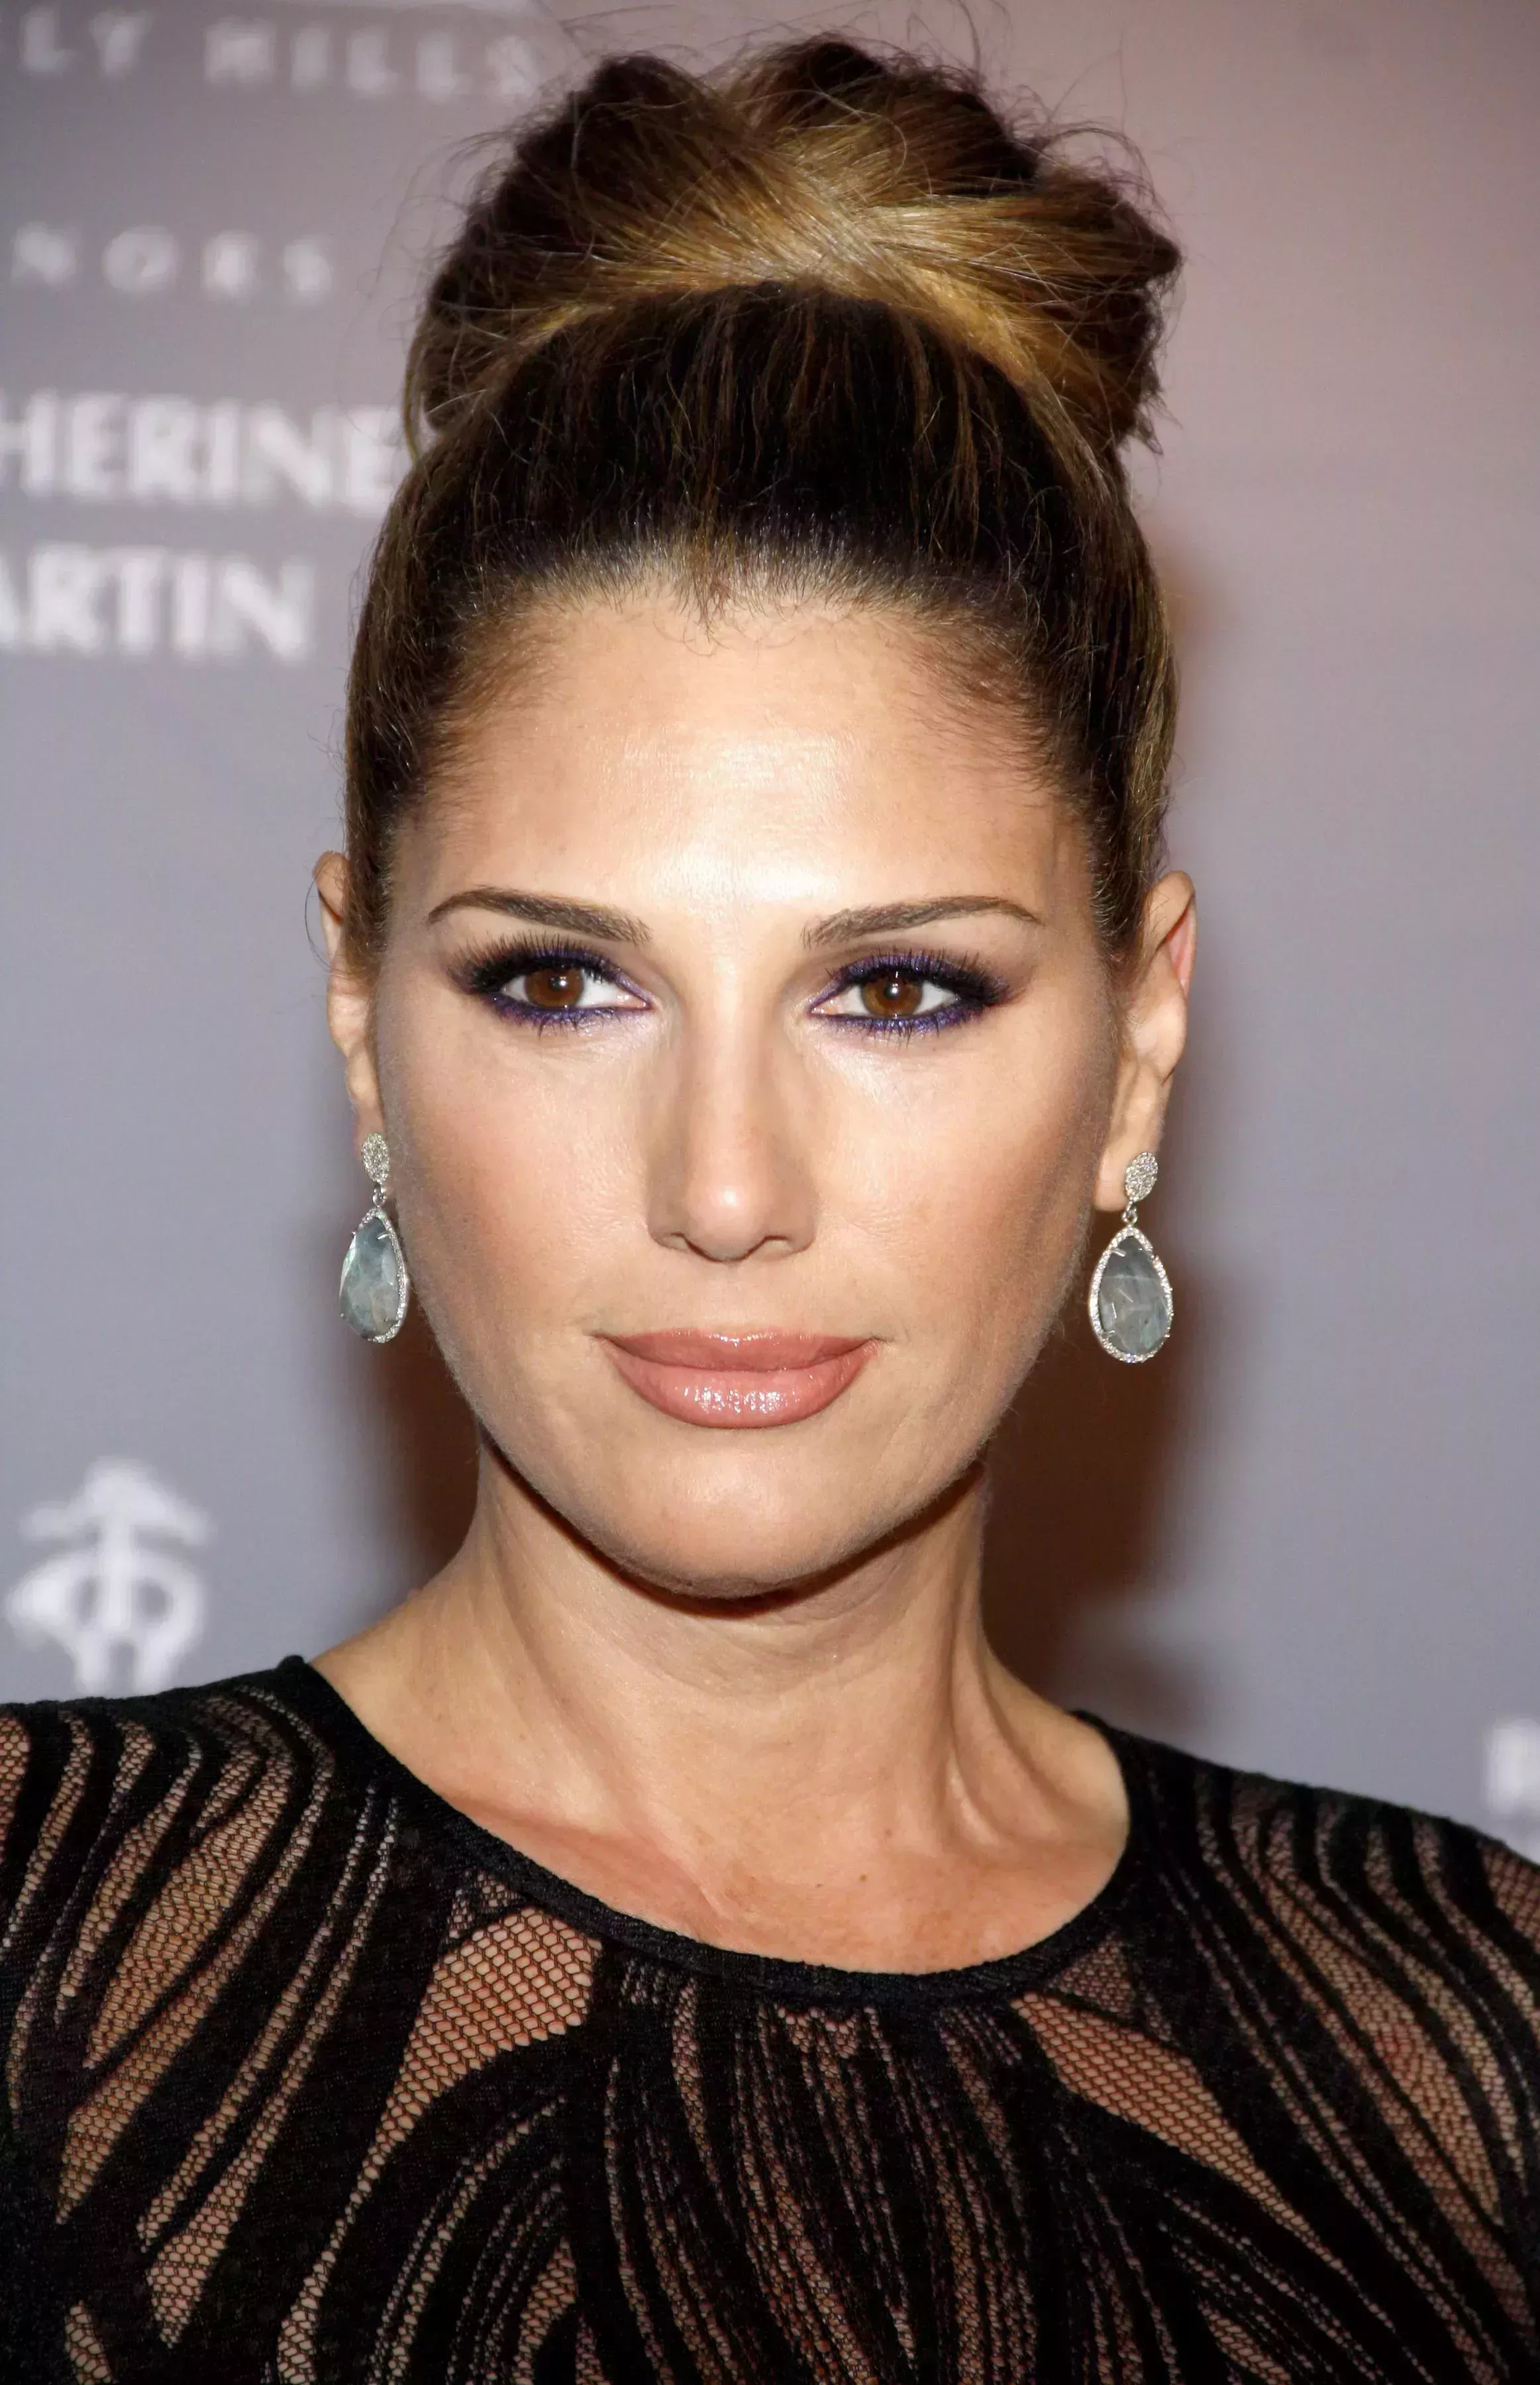 Daisy Fuentes with that Crown Bun